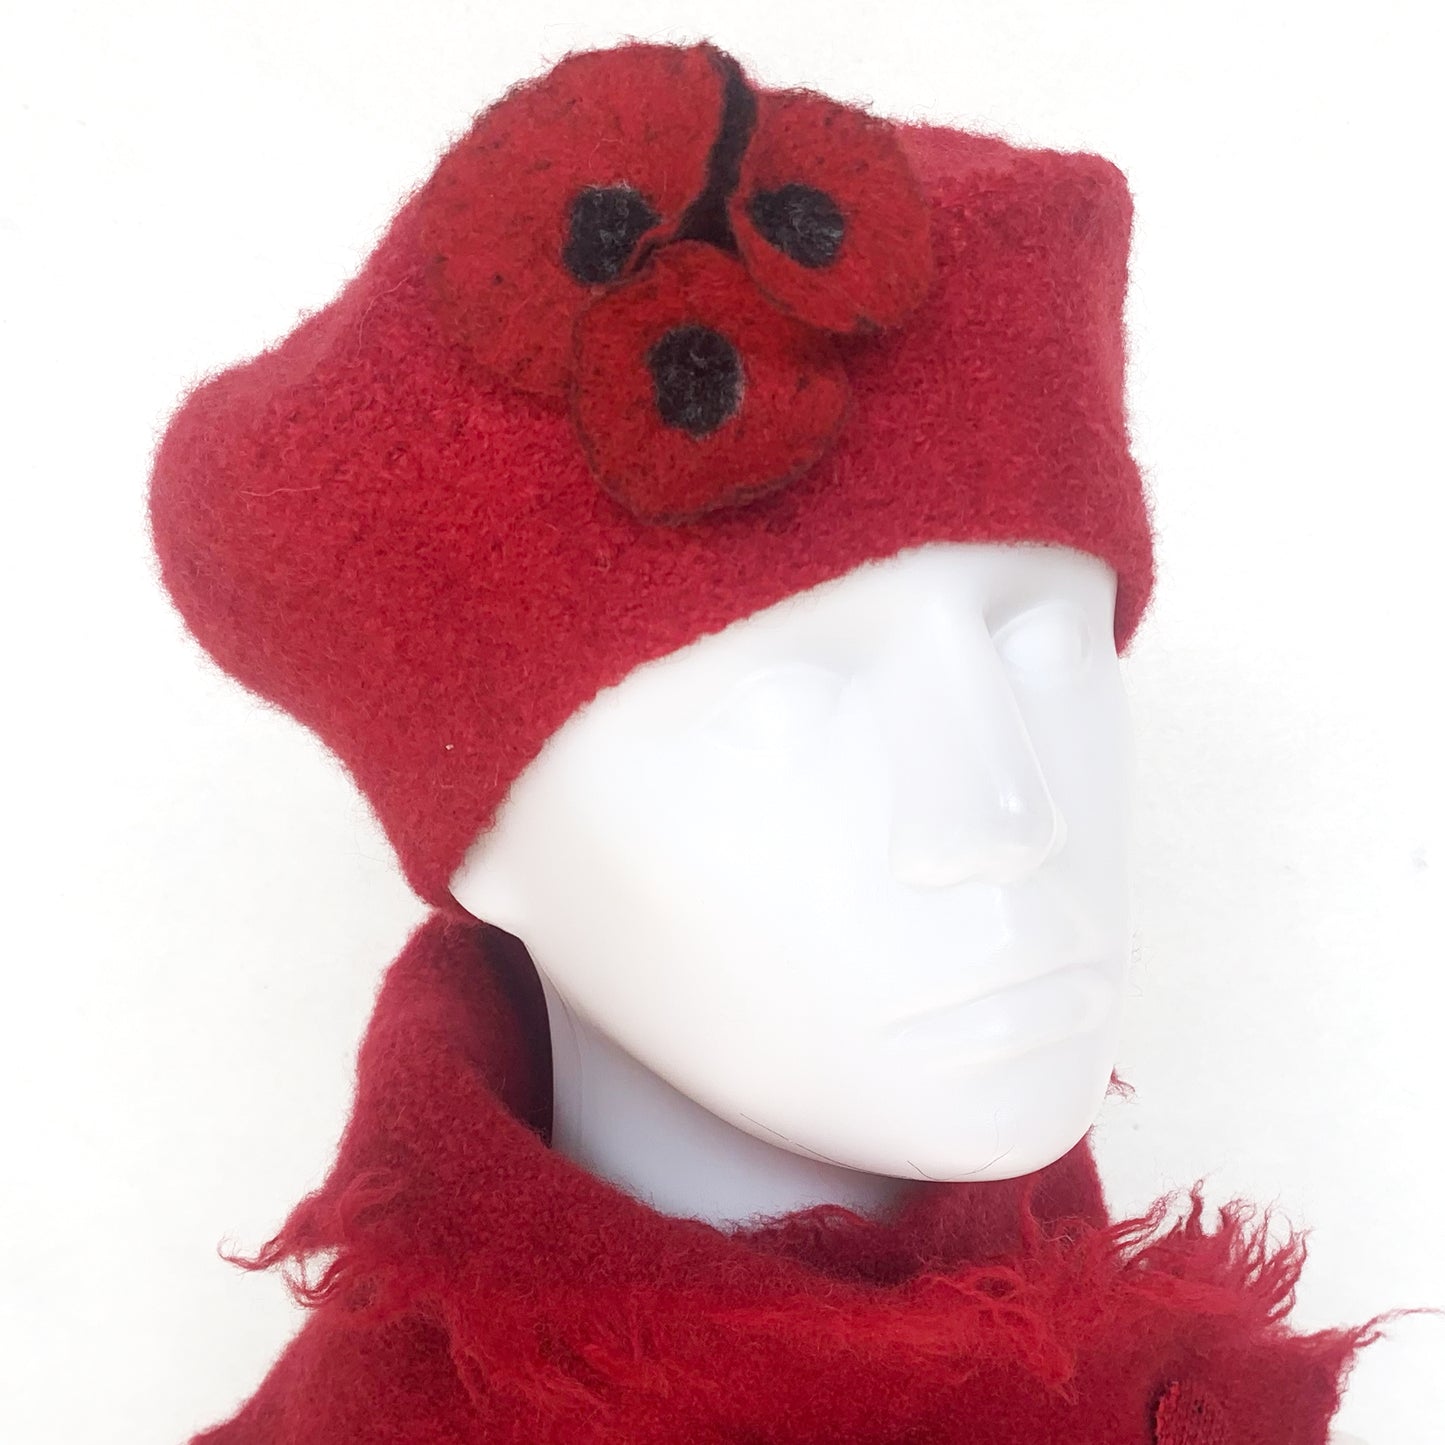 100% Felted Wool Beret - Red & Flowers red